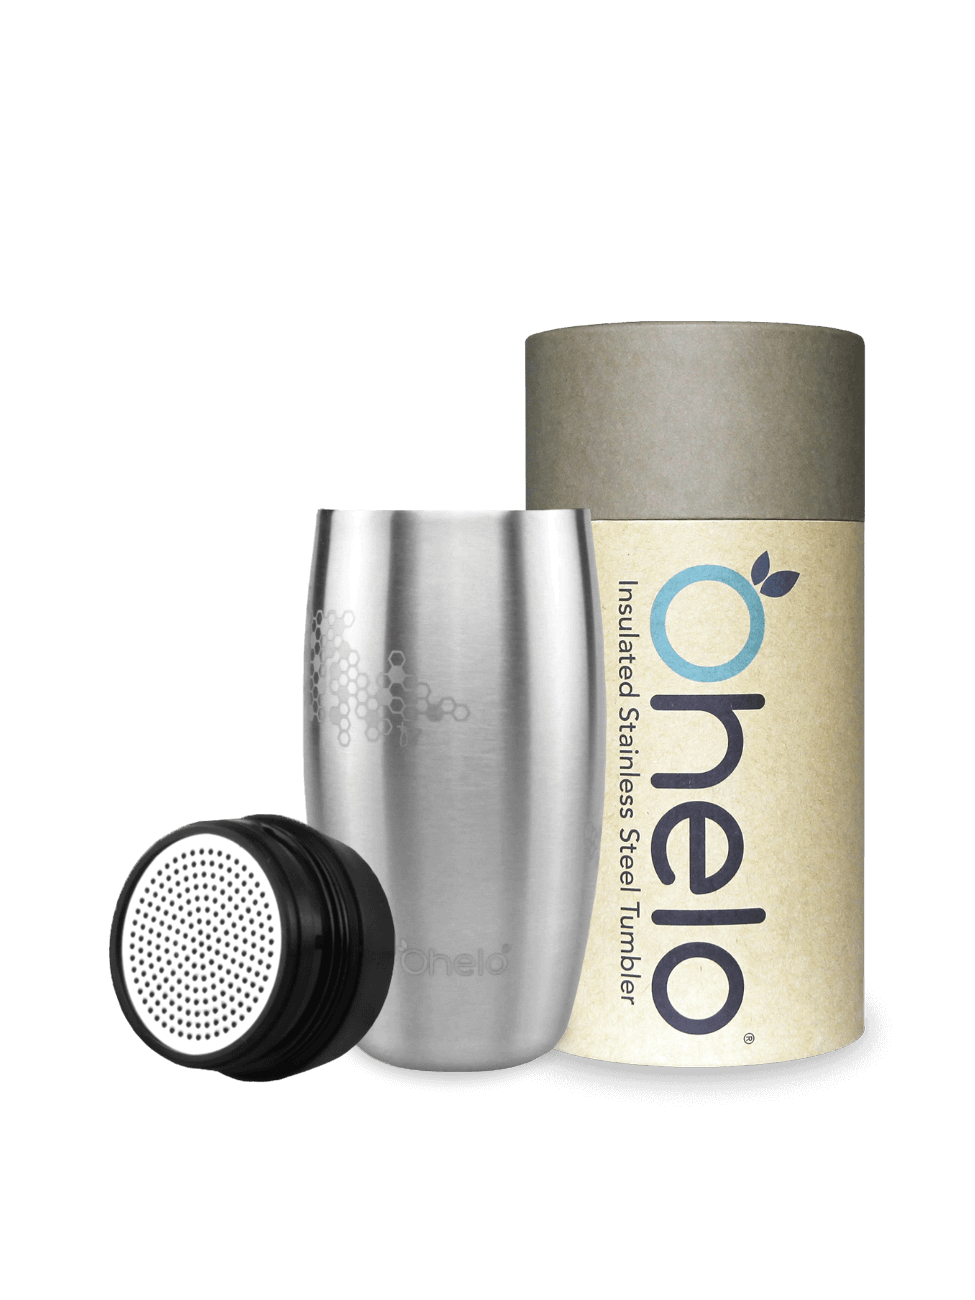 Ohelo steel insulated tumbler in bee design with recycled packaging